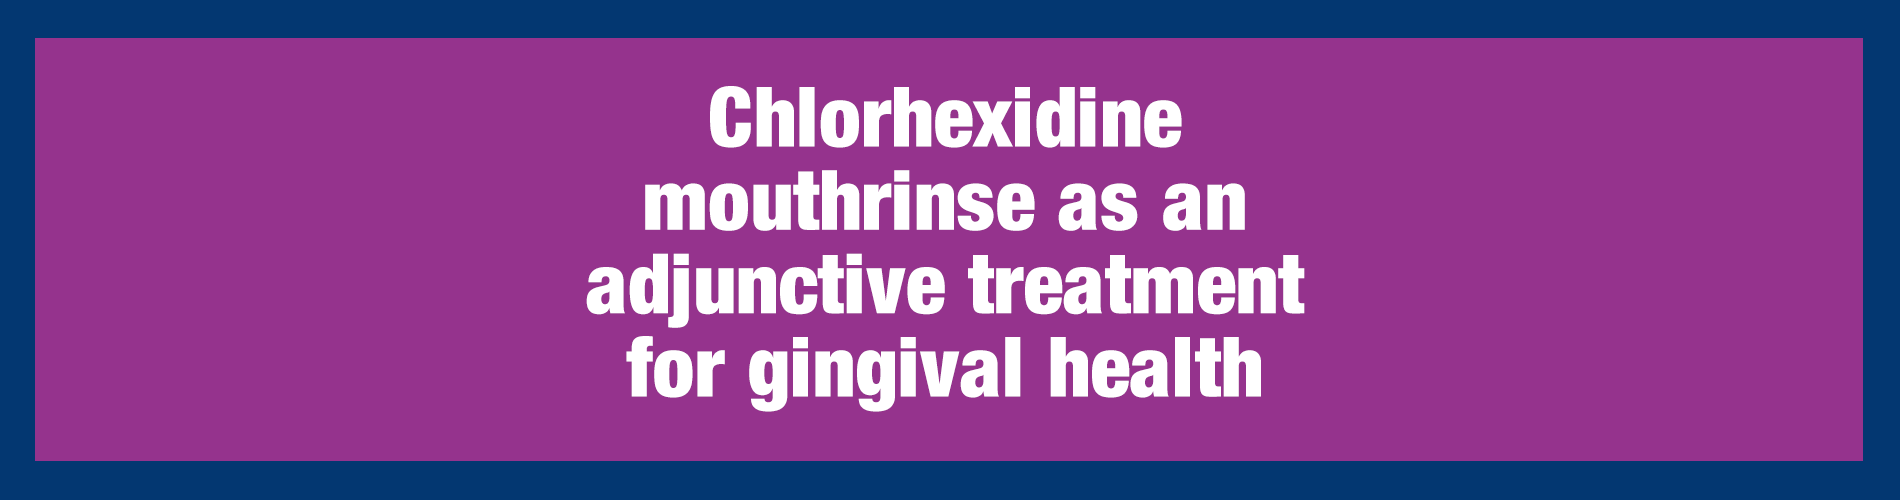 Chlorhexidine mouthrinse as an adjunctive treatment for gingival health